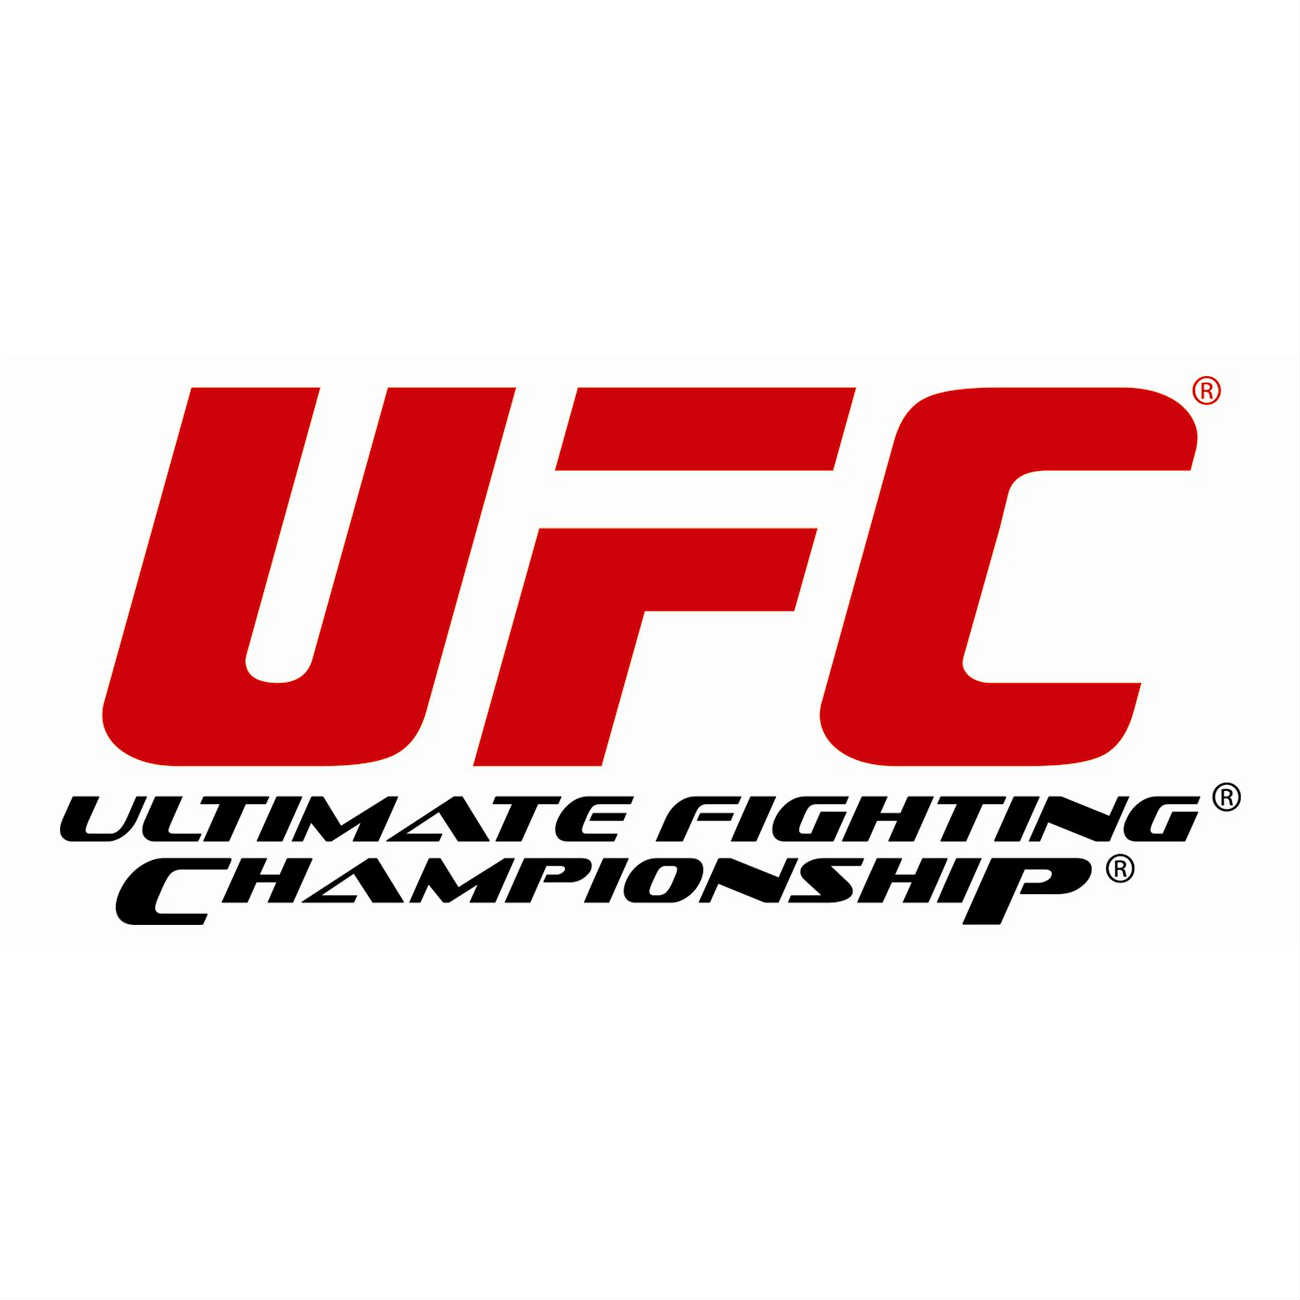 Where to watch the UFC fights in Shanghai